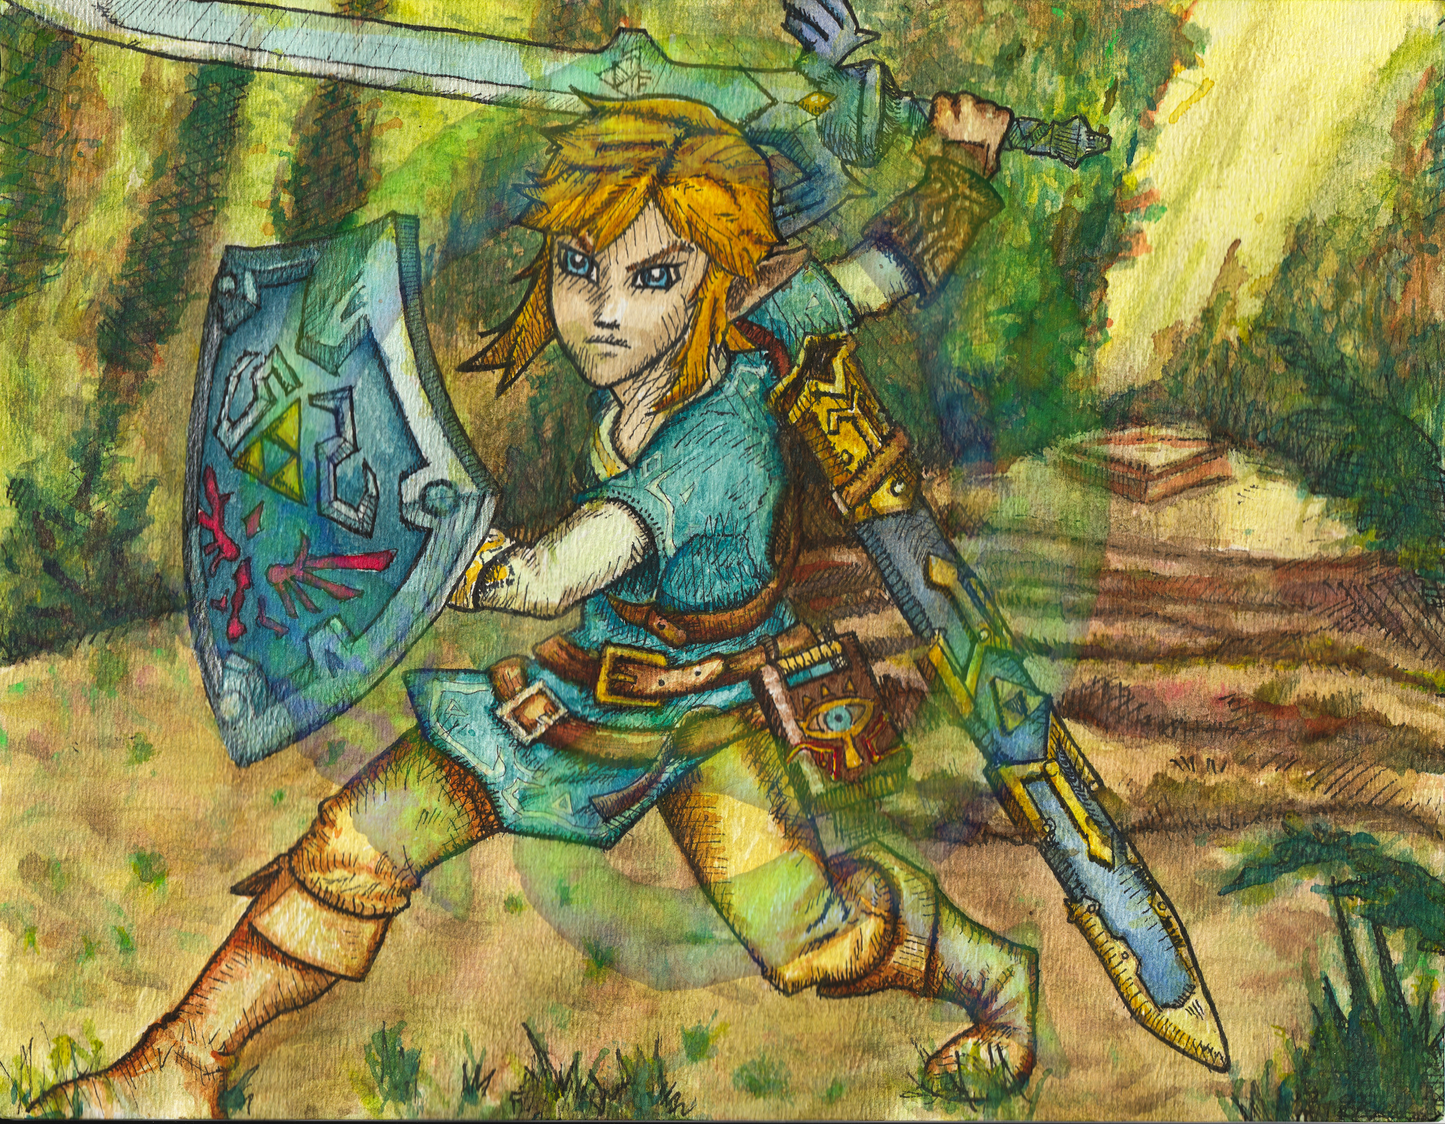 Link with Master Sword from Zelda: Breath of the Wild -Watercolor Painting (Original)